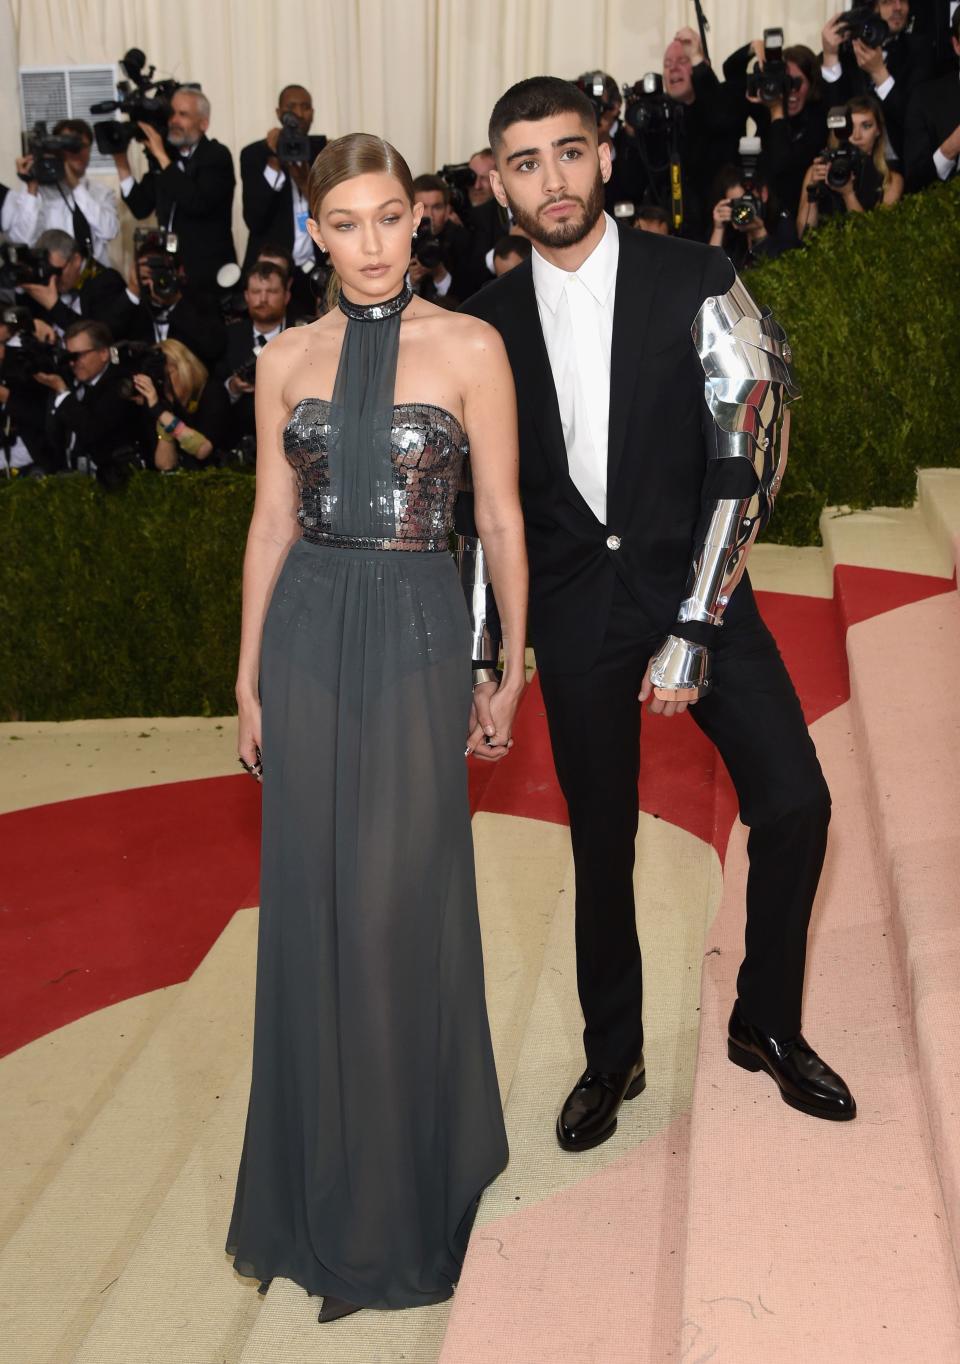 <h1 class="title">Gigi Hadid in a Tommy Hilfiger dress and Lynn Ban jewelry and Zayn Malik in Versace and Jimmy Choo shoes</h1><cite class="credit">Photo: Getty Images</cite>